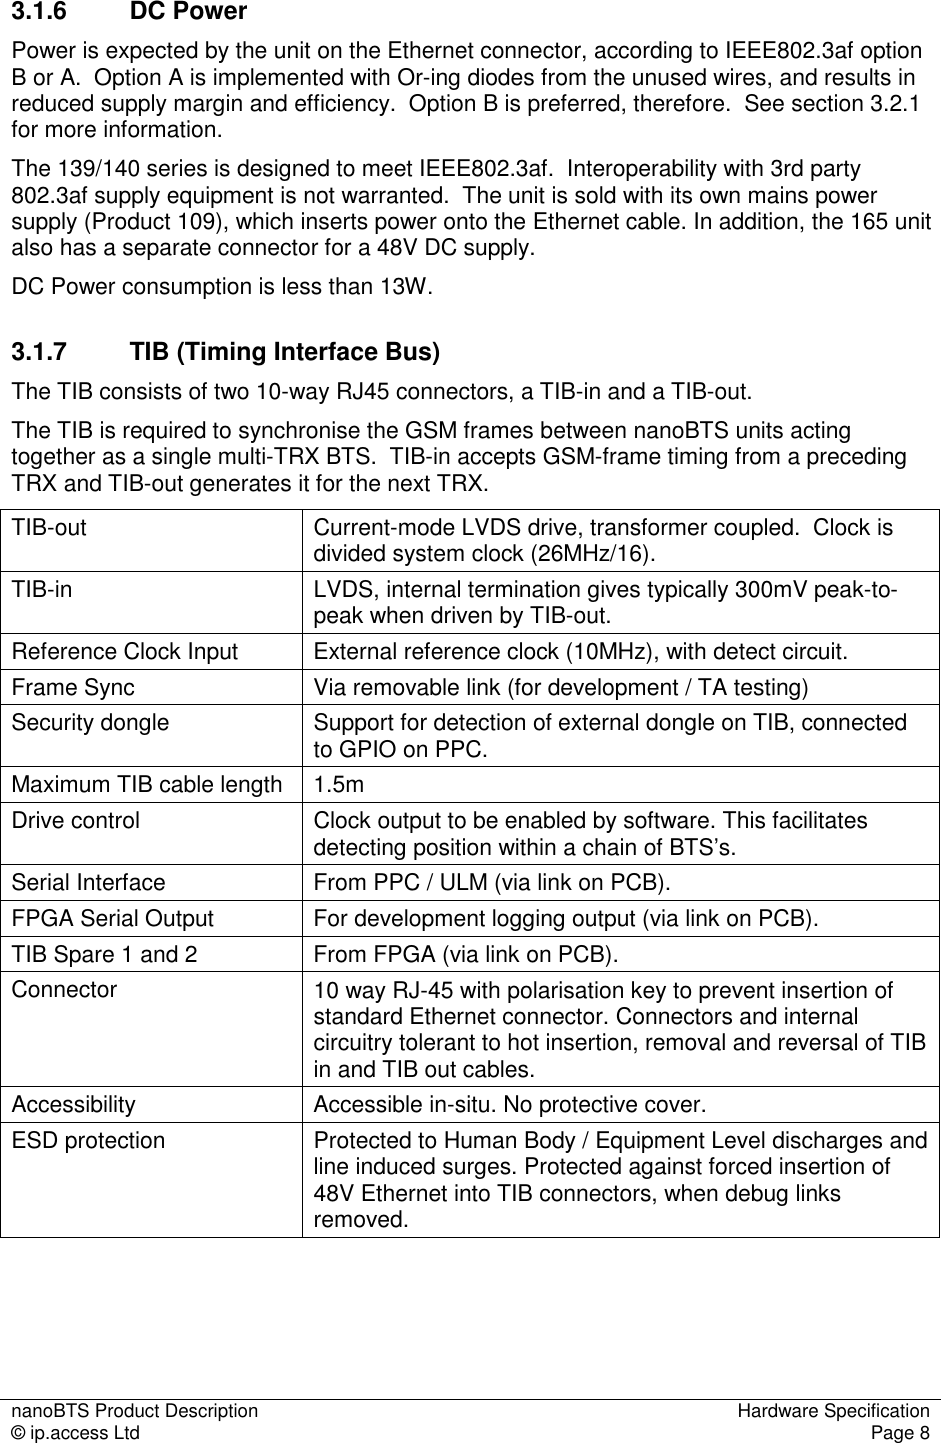 nanoBTS Product Description  Hardware Specification © ip.access Ltd  Page 8  3.1.6  DC Power Power is expected by the unit on the Ethernet connector, according to IEEE802.3af option B or A.  Option A is implemented with Or-ing diodes from the unused wires, and results in reduced supply margin and efficiency.  Option B is preferred, therefore.  See section 3.2.1 for more information. The 139/140 series is designed to meet IEEE802.3af.  Interoperability with 3rd party 802.3af supply equipment is not warranted.  The unit is sold with its own mains power supply (Product 109), which inserts power onto the Ethernet cable. In addition, the 165 unit also has a separate connector for a 48V DC supply. DC Power consumption is less than 13W. 3.1.7  TIB (Timing Interface Bus) The TIB consists of two 10-way RJ45 connectors, a TIB-in and a TIB-out. The TIB is required to synchronise the GSM frames between nanoBTS units acting together as a single multi-TRX BTS.  TIB-in accepts GSM-frame timing from a preceding TRX and TIB-out generates it for the next TRX.   TIB-out  Current-mode LVDS drive, transformer coupled.  Clock is divided system clock (26MHz/16). TIB-in  LVDS, internal termination gives typically 300mV peak-to-peak when driven by TIB-out. Reference Clock Input  External reference clock (10MHz), with detect circuit. Frame Sync  Via removable link (for development / TA testing) Security dongle  Support for detection of external dongle on TIB, connected to GPIO on PPC. Maximum TIB cable length  1.5m Drive control  Clock output to be enabled by software. This facilitates detecting position within a chain of BTS’s. Serial Interface  From PPC / ULM (via link on PCB). FPGA Serial Output  For development logging output (via link on PCB). TIB Spare 1 and 2  From FPGA (via link on PCB). Connector  10 way RJ-45 with polarisation key to prevent insertion of standard Ethernet connector. Connectors and internal circuitry tolerant to hot insertion, removal and reversal of TIB in and TIB out cables. Accessibility  Accessible in-situ. No protective cover. ESD protection  Protected to Human Body / Equipment Level discharges and line induced surges. Protected against forced insertion of 48V Ethernet into TIB connectors, when debug links removed.  